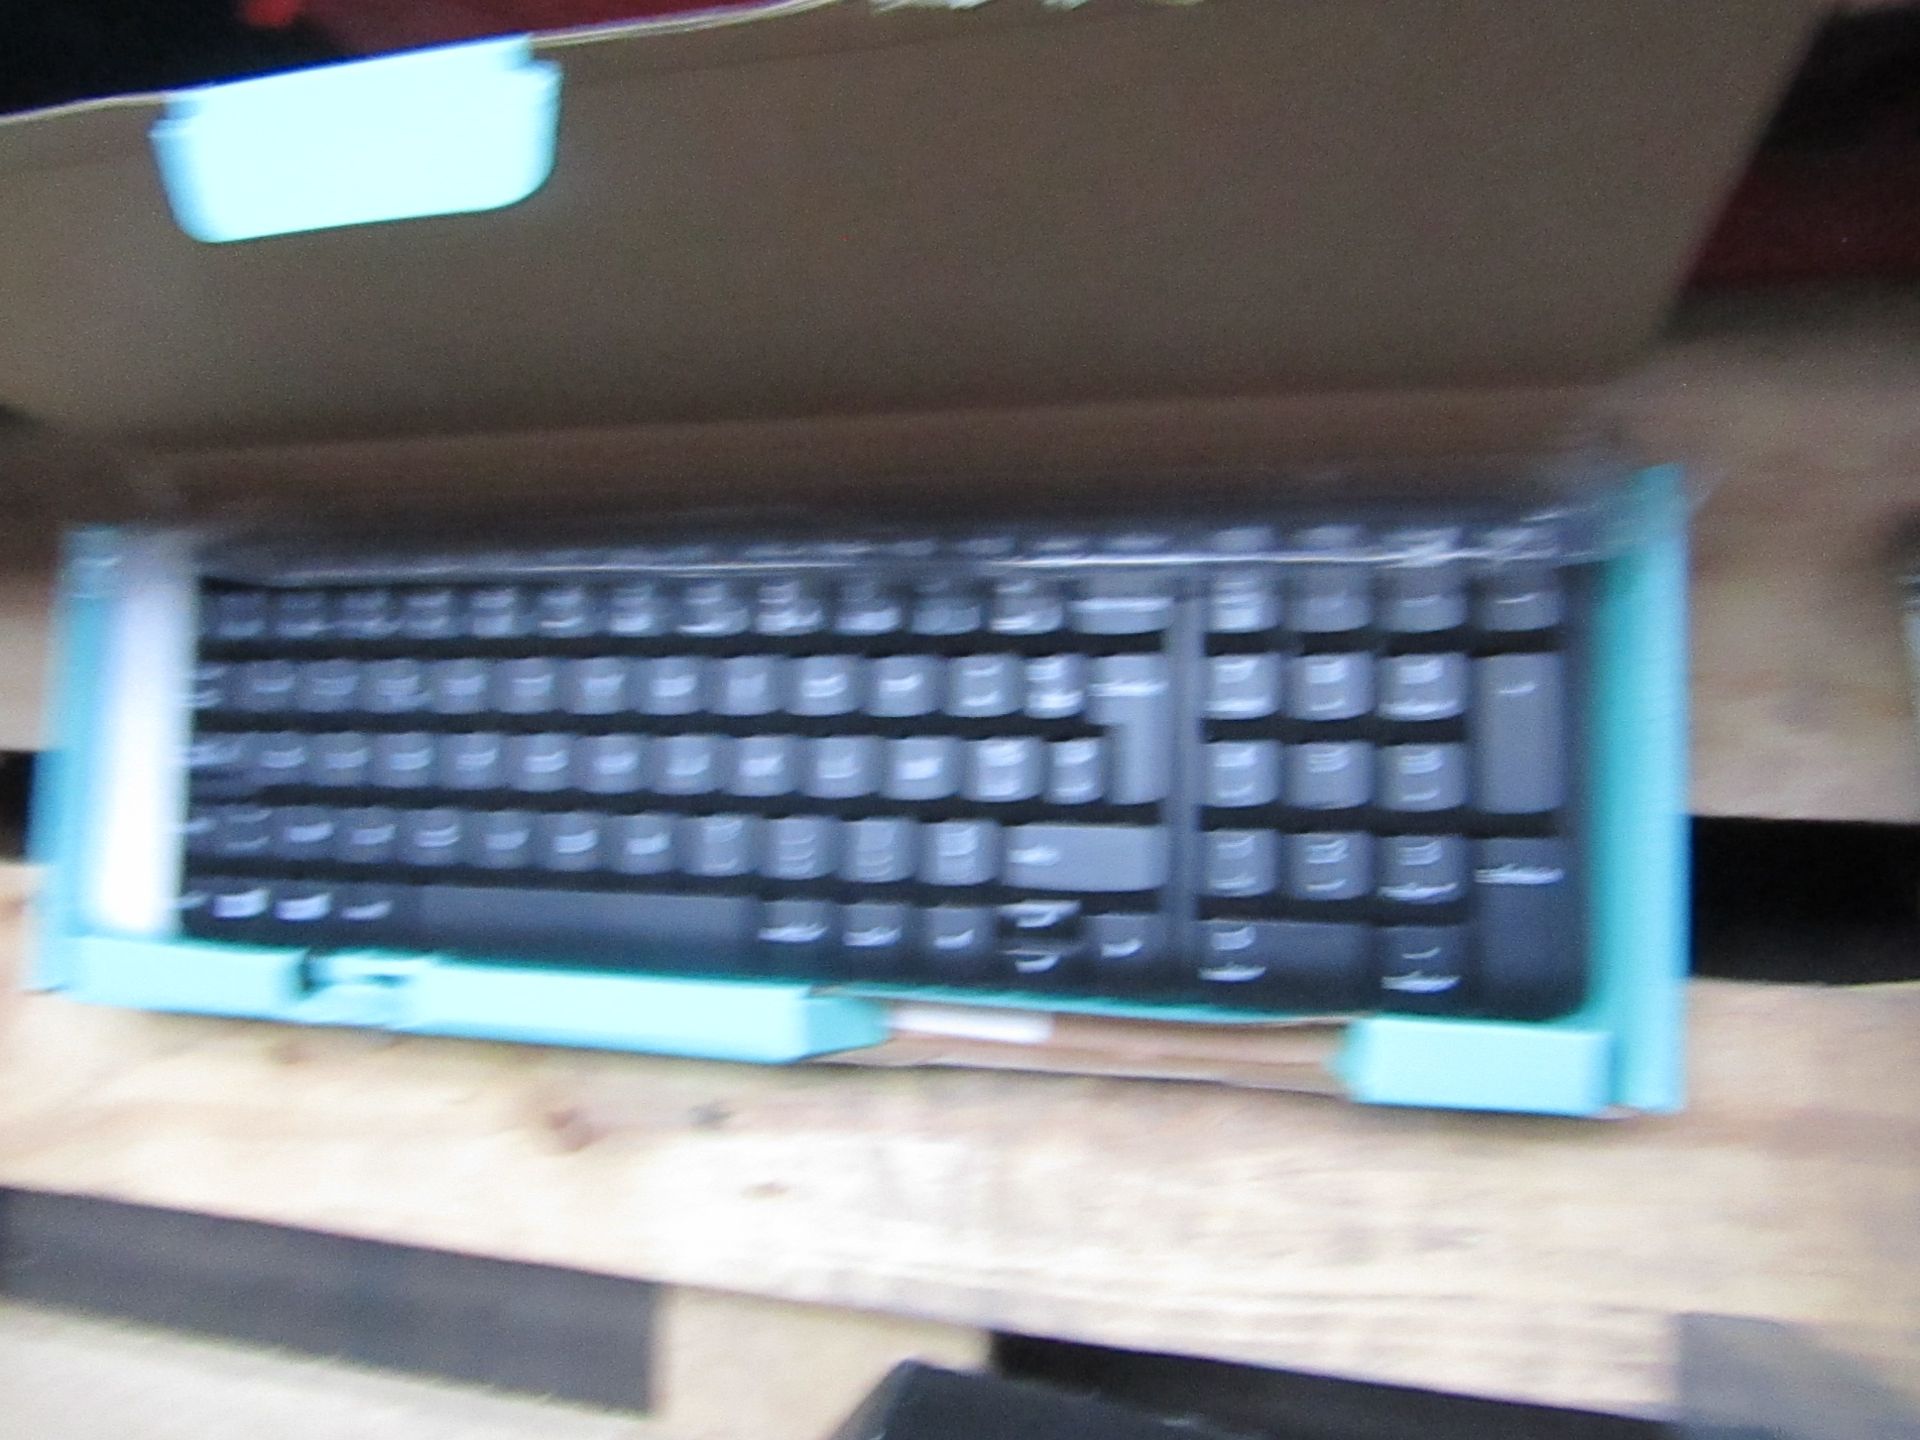 Logitech K230 wireless keyboard, boxed and unchecked but has AZERTY layout